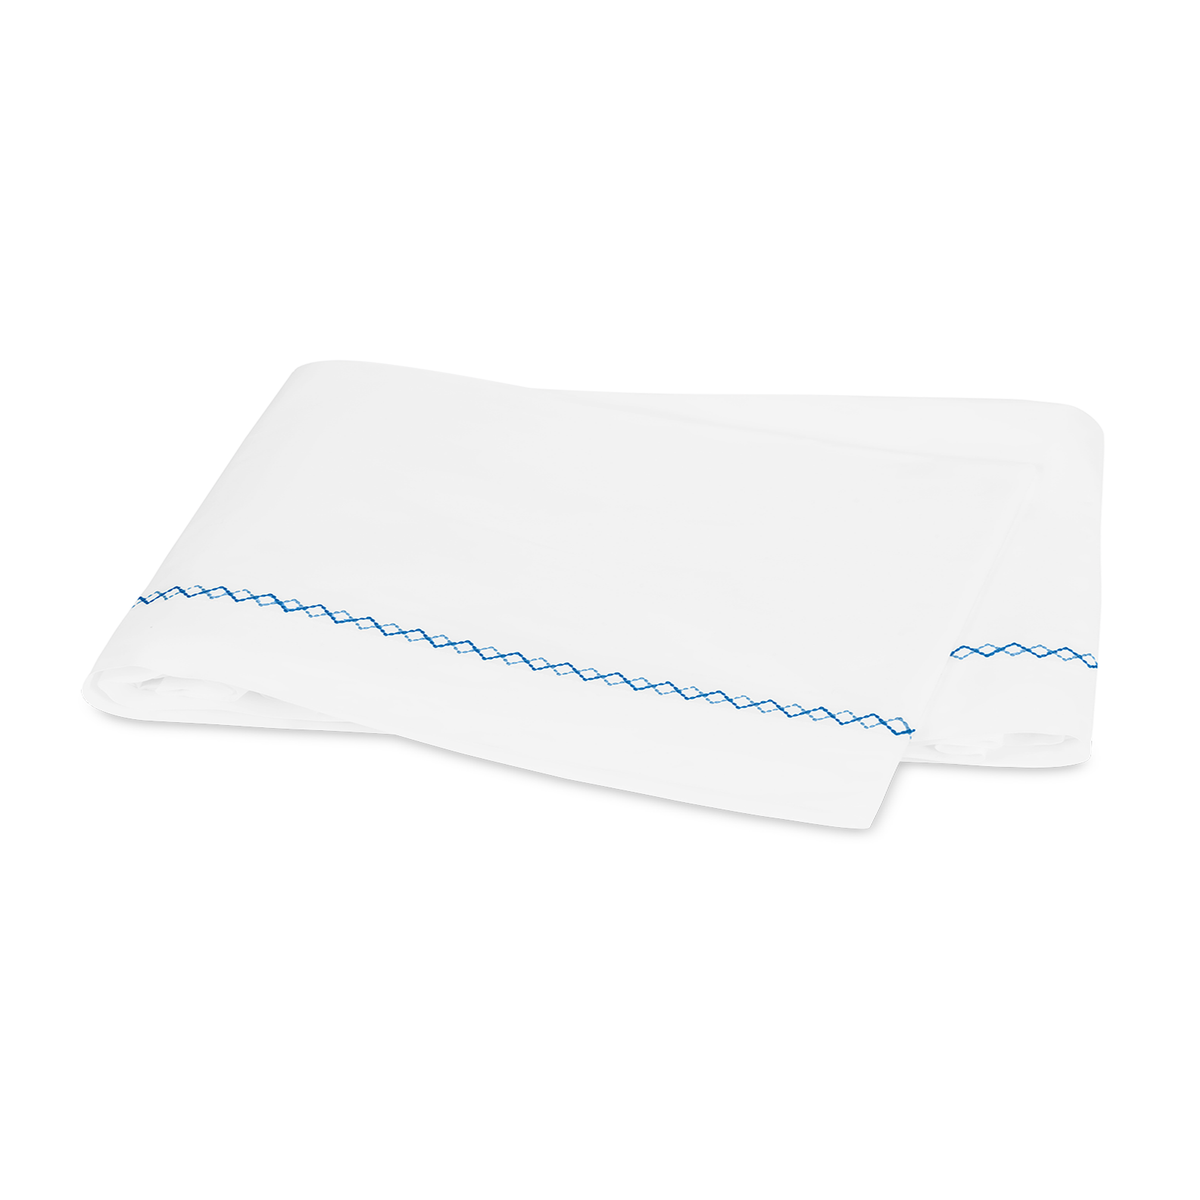 Flat Sheet of Matouk Hatch Bedding in Sky Color